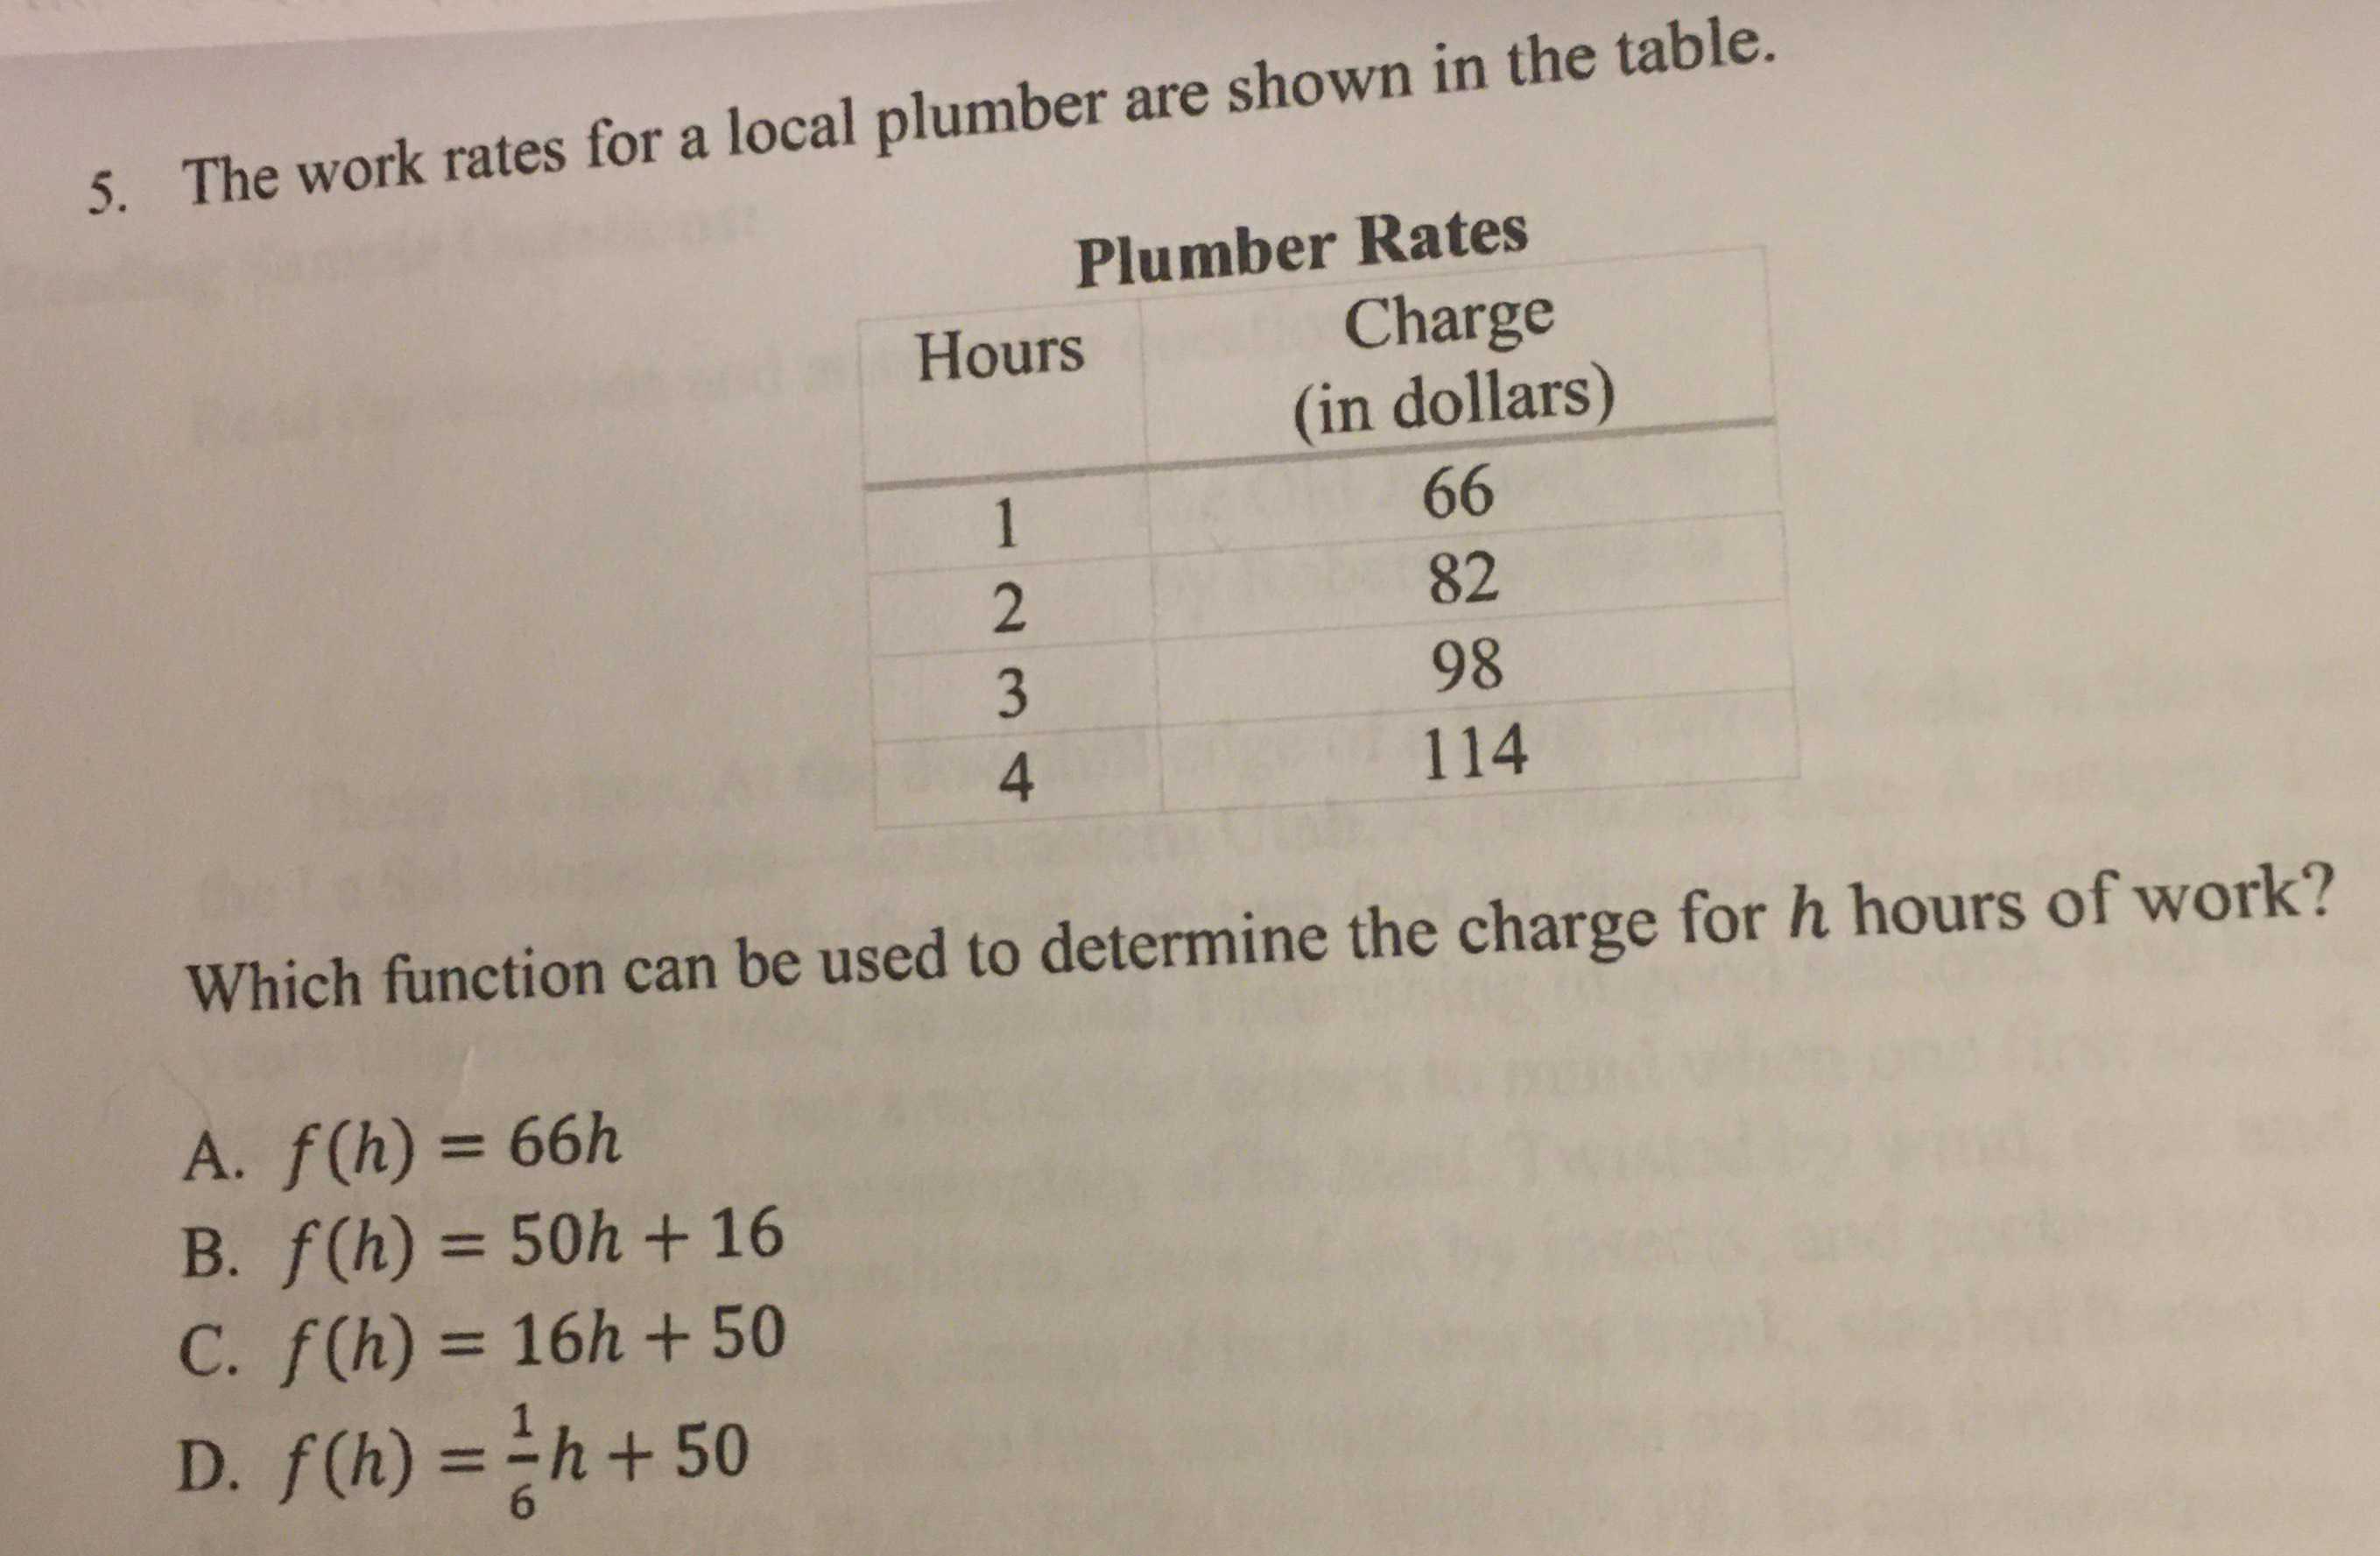 5. The work rates for a local plumber are shown in...